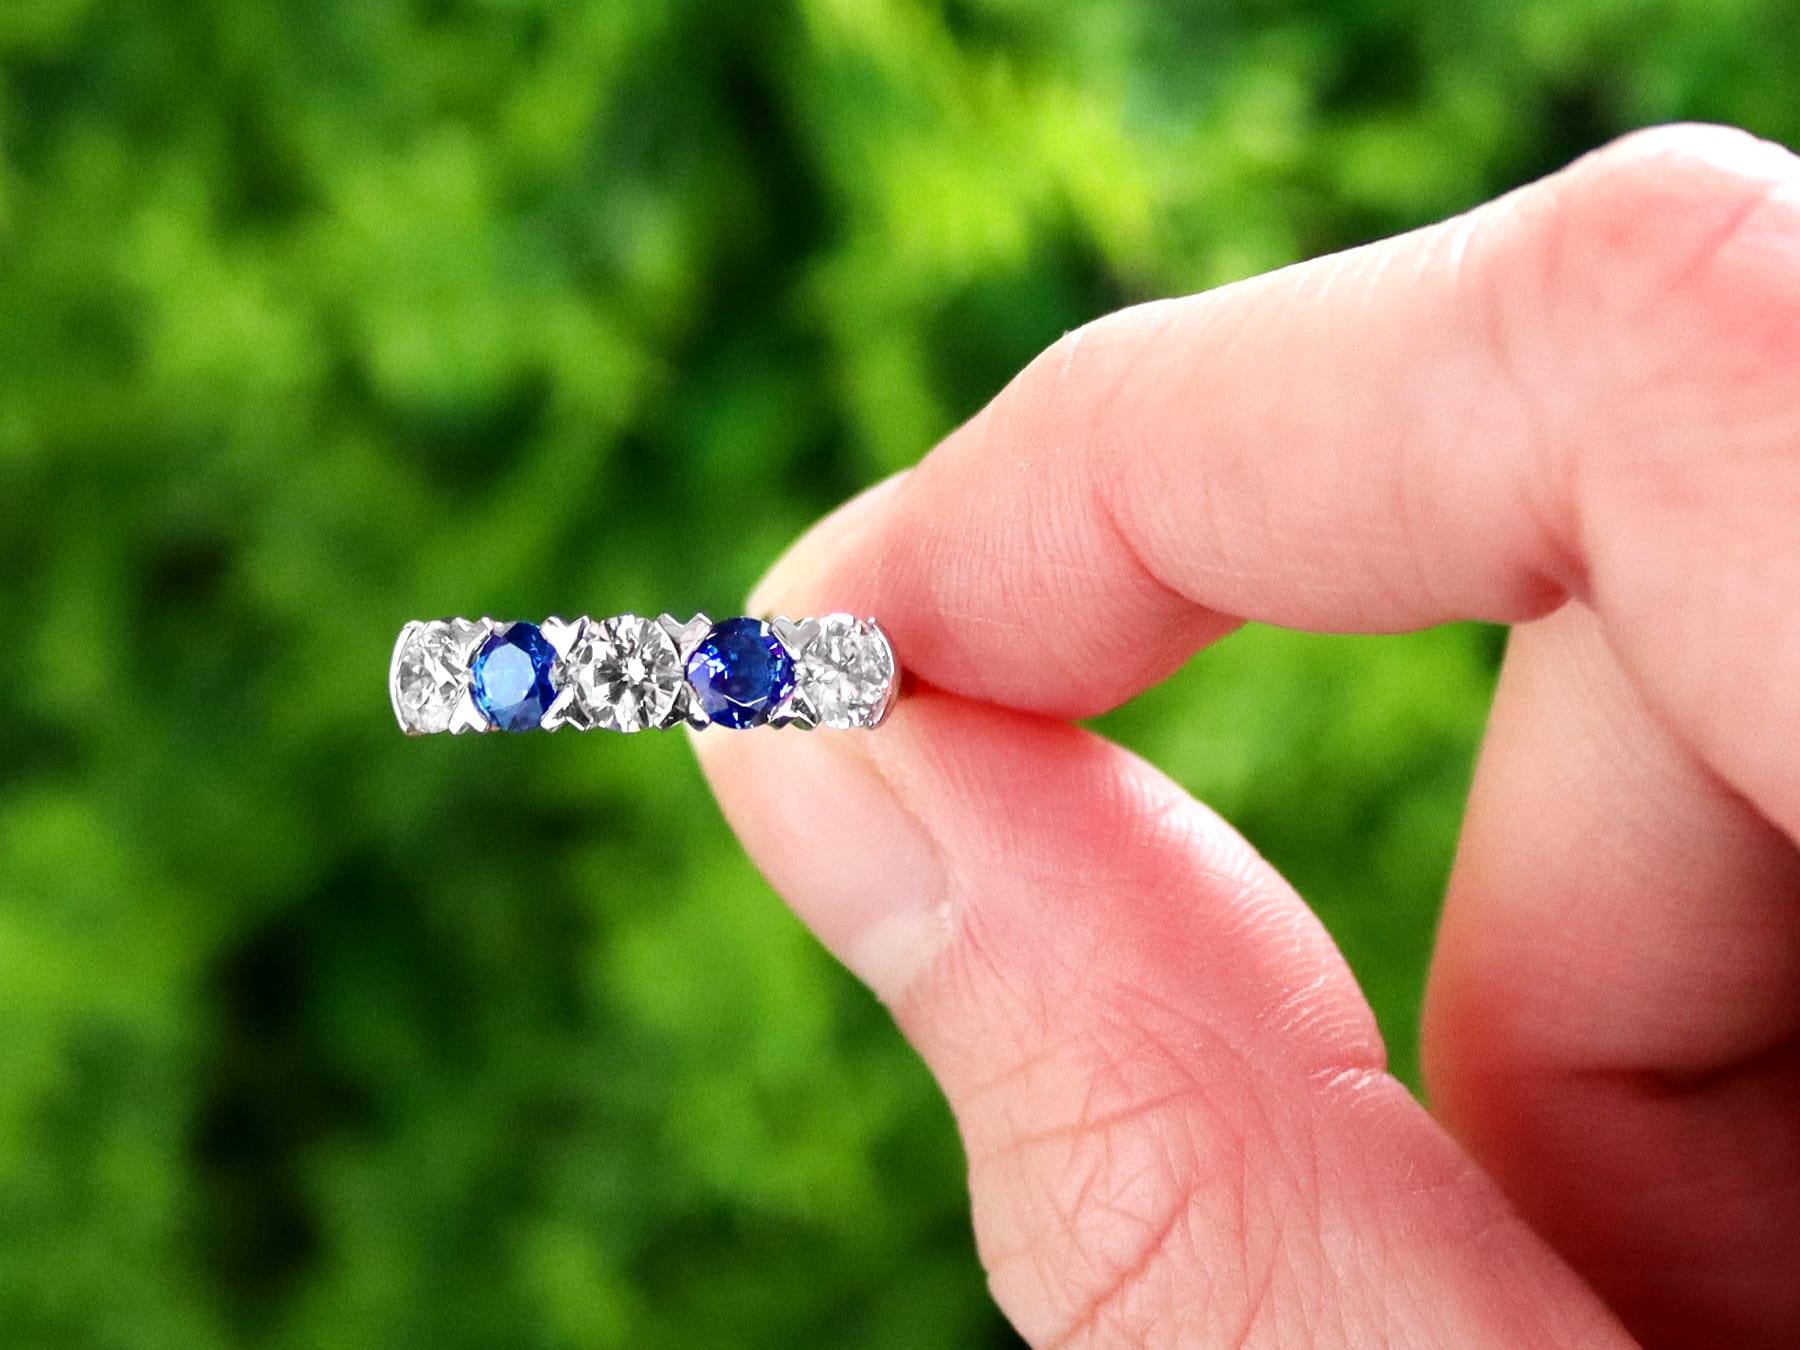 A stunning contemporary 0.62Ct blue sapphire, 0.95Ct diamond, and platinum five stone dress ring; part of our diverse gemstone jewelry collections.

This stunning, fine and impressive five stone sapphire and diamond ring has been crafted in